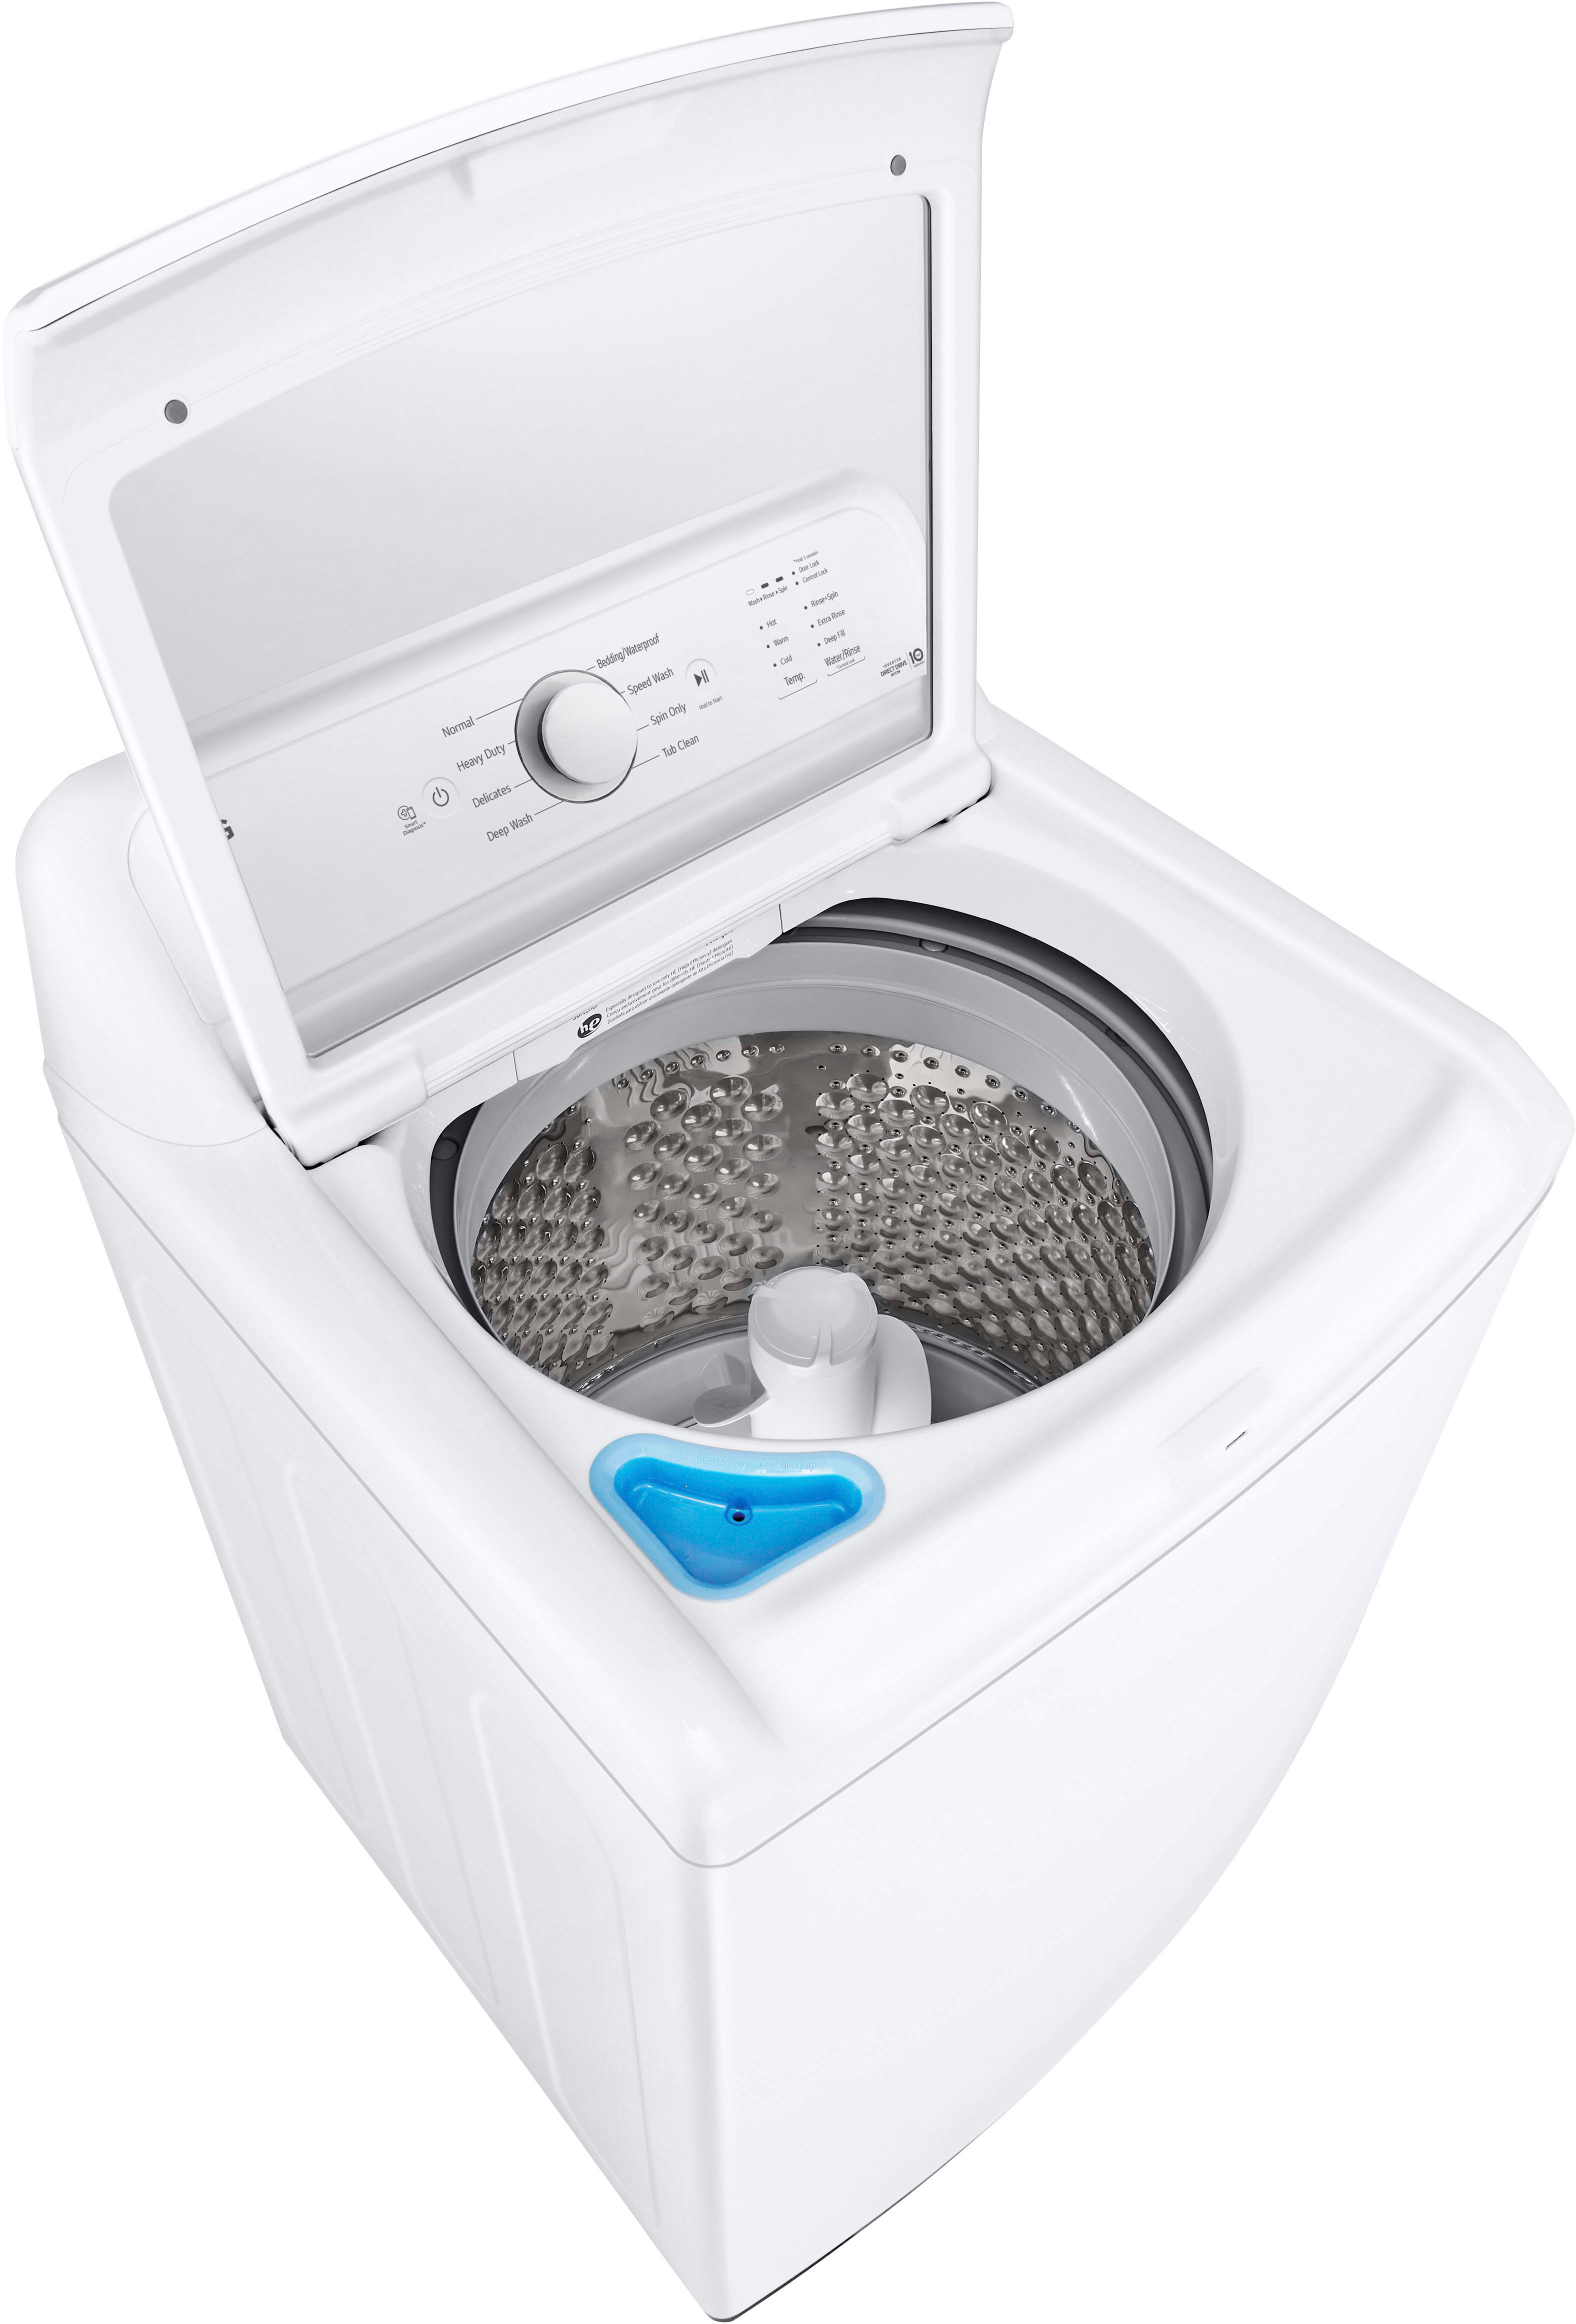 LG 4.1 Cu. Ft. Top Load Washer with SlamProof Glass Lid White WT6105CW -  Best Buy